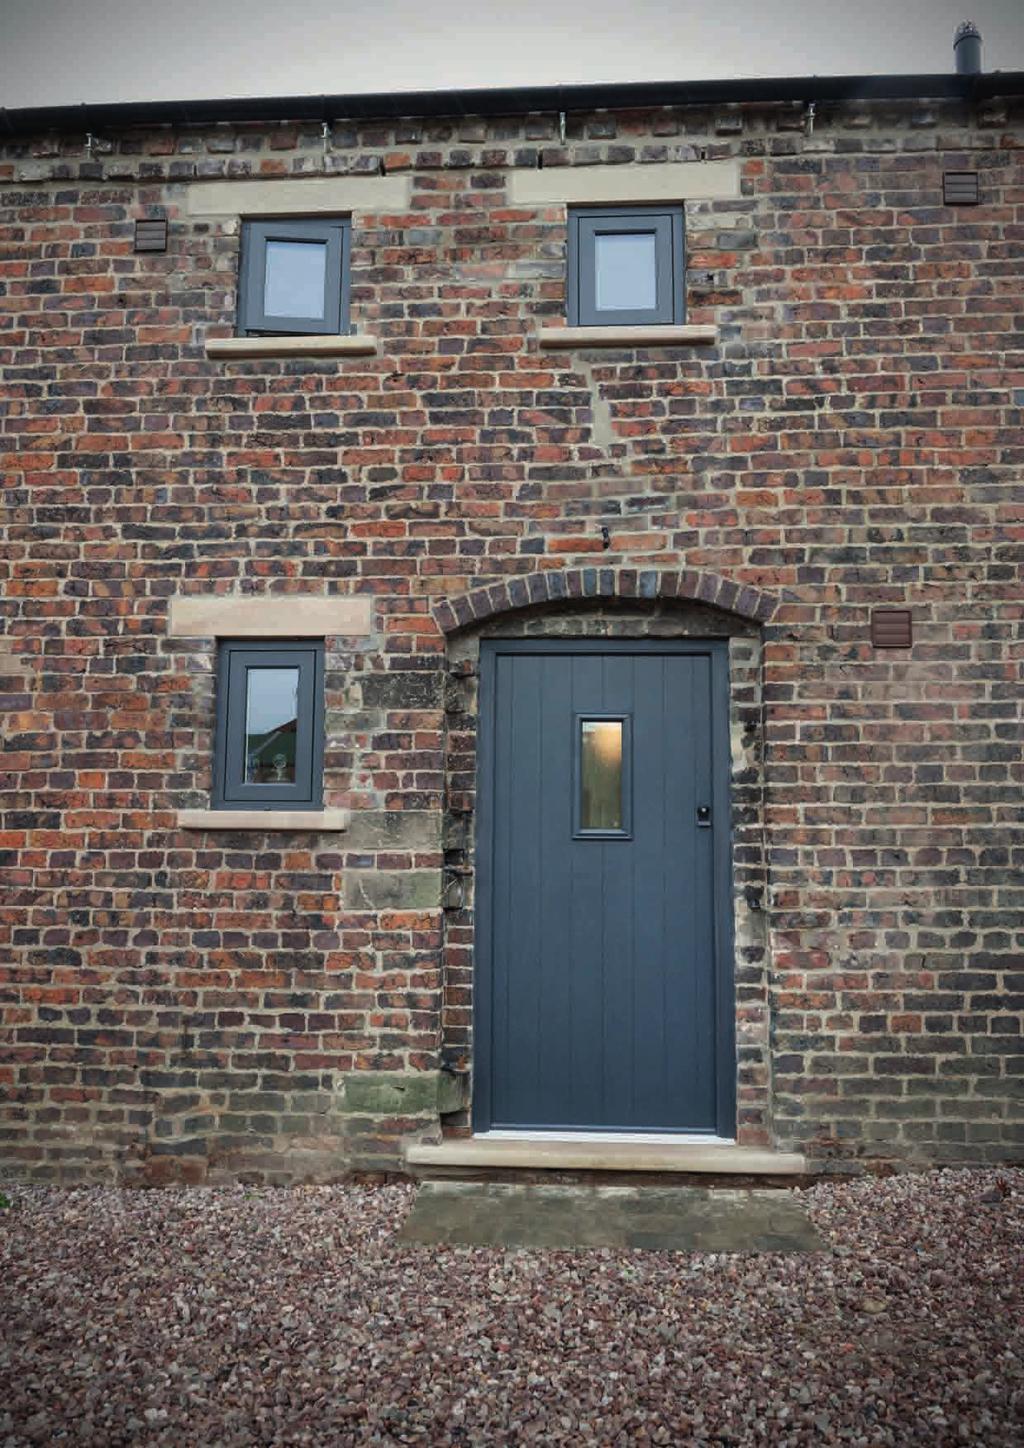 YOUR DOOR Residence Collection doors are a stunning range of industry leading, solid laminate timber core composite doors wrapped in the beautifully bespoke R9 door frame.